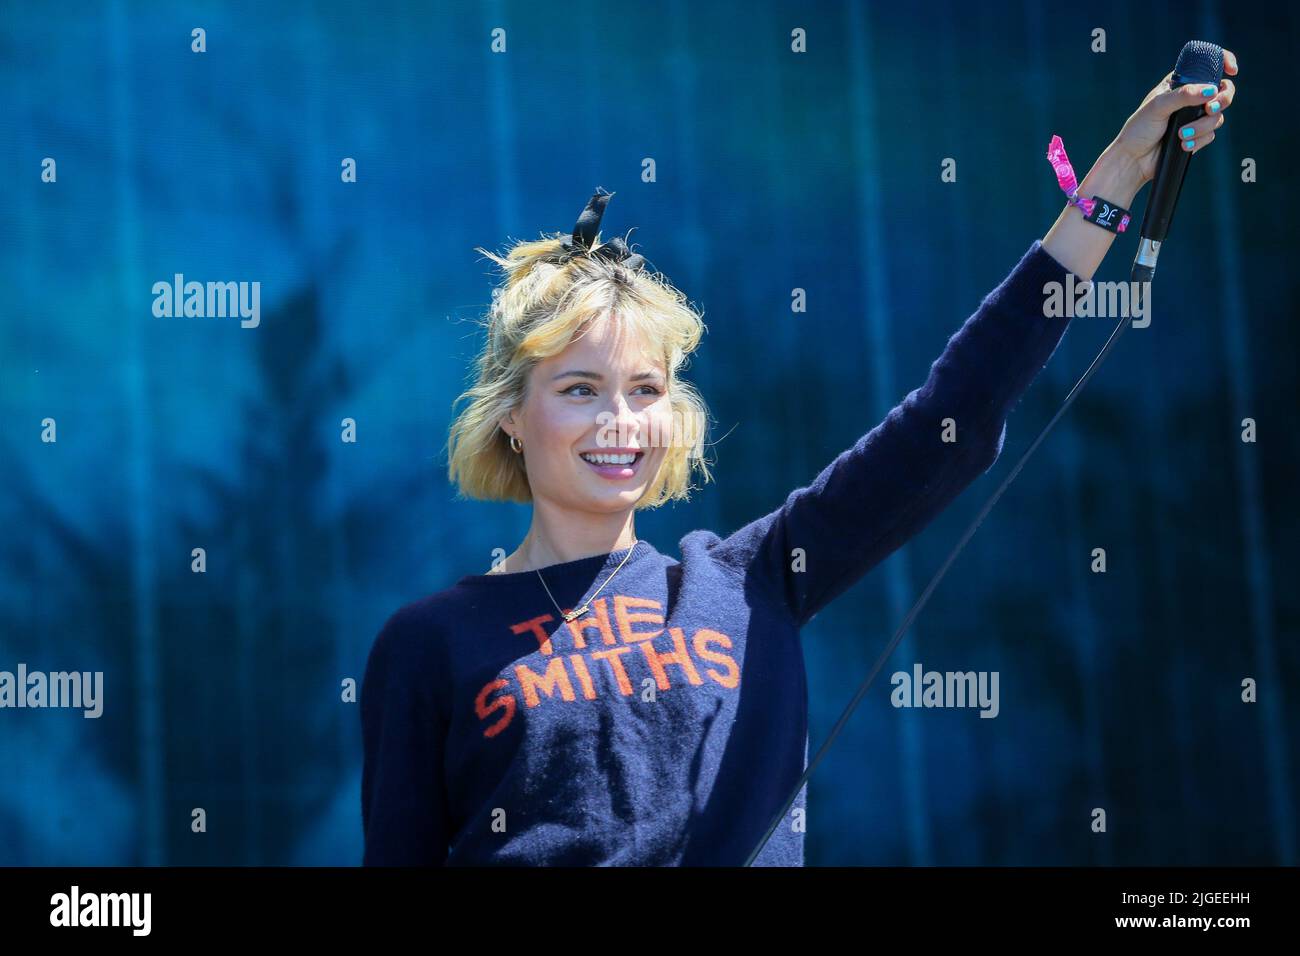 Glasgow, UK. 10th July, 2021. On the third and final day of the TRNSMT music festival held on Glasgow Green, Glasgow, Scotland UK, NINA NISBITT opened the main stage in front of a sell-out maximum capacity audience of 50,000. Credit: Findlay/Alamy Live News Stock Photo